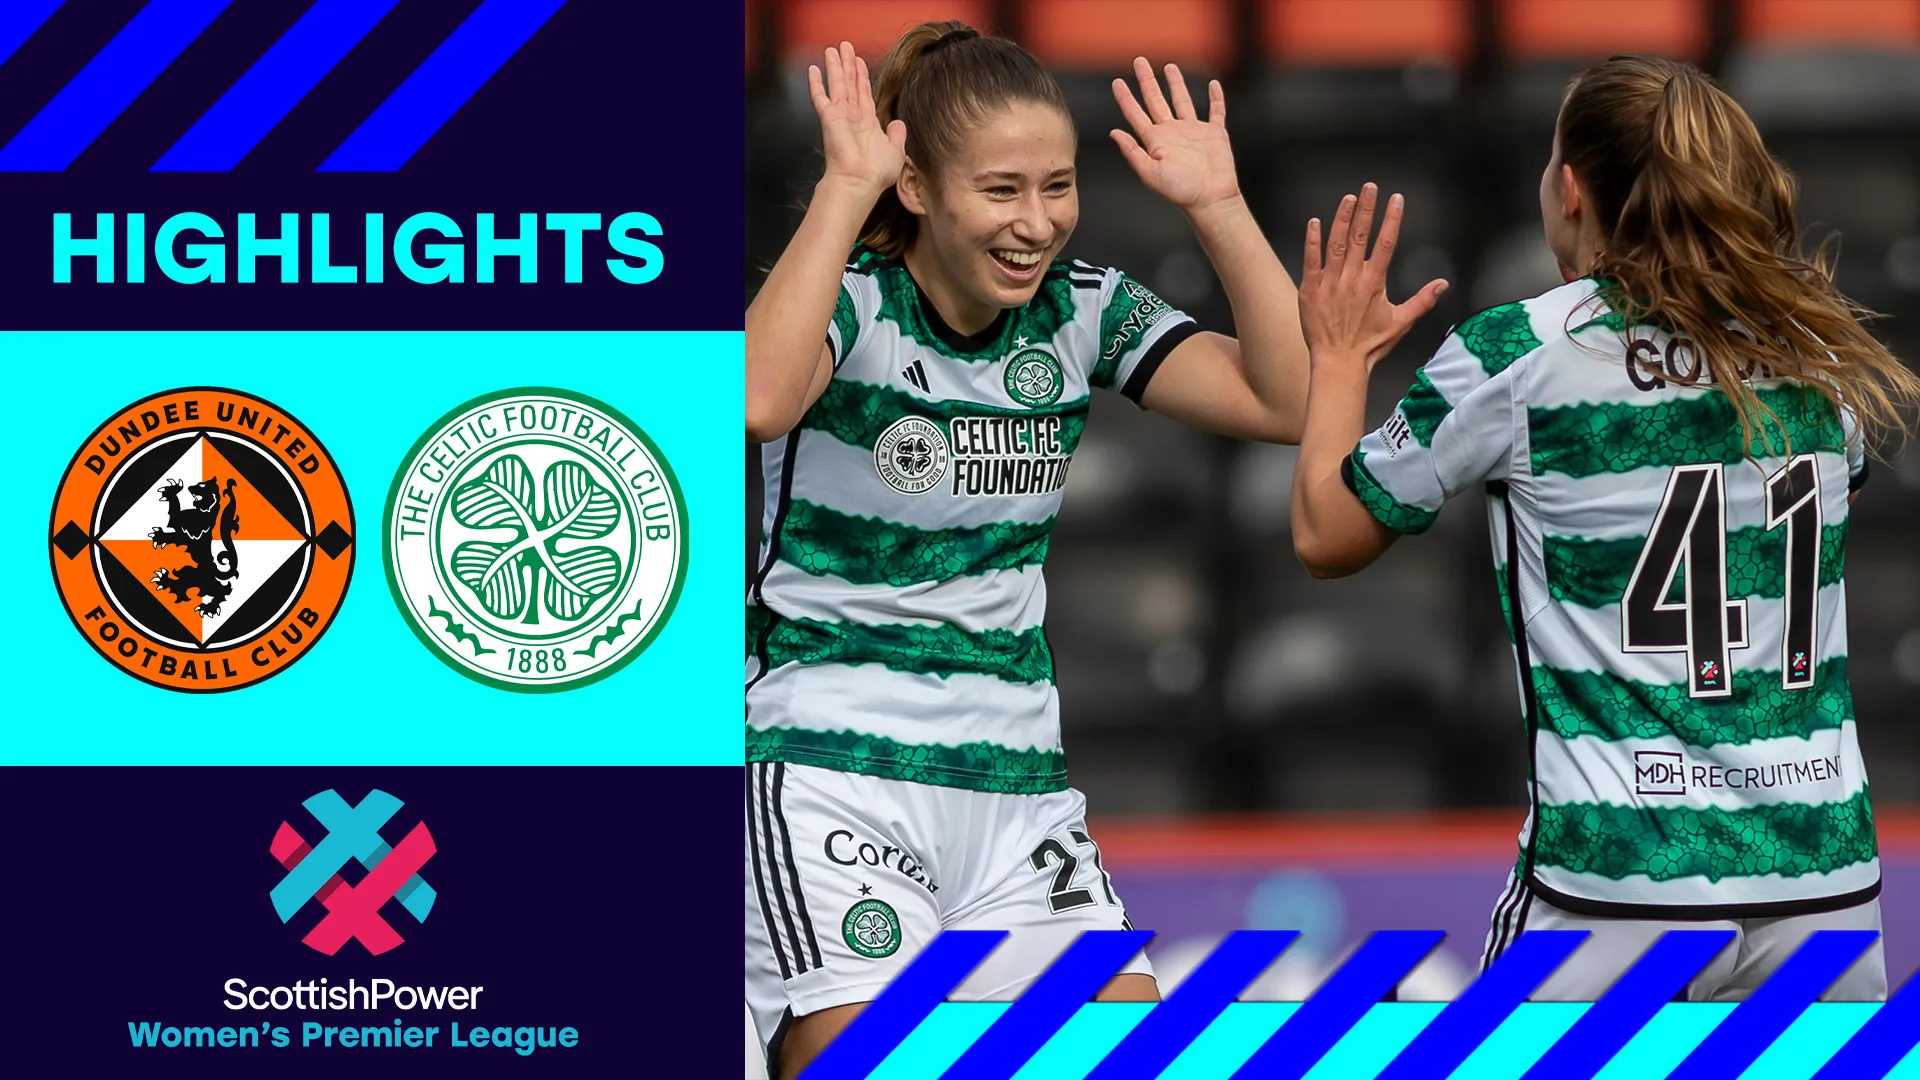 Image for Dundee United 0-2 Celtic | Celtic remain a point behind top after narrow away win | SWPL